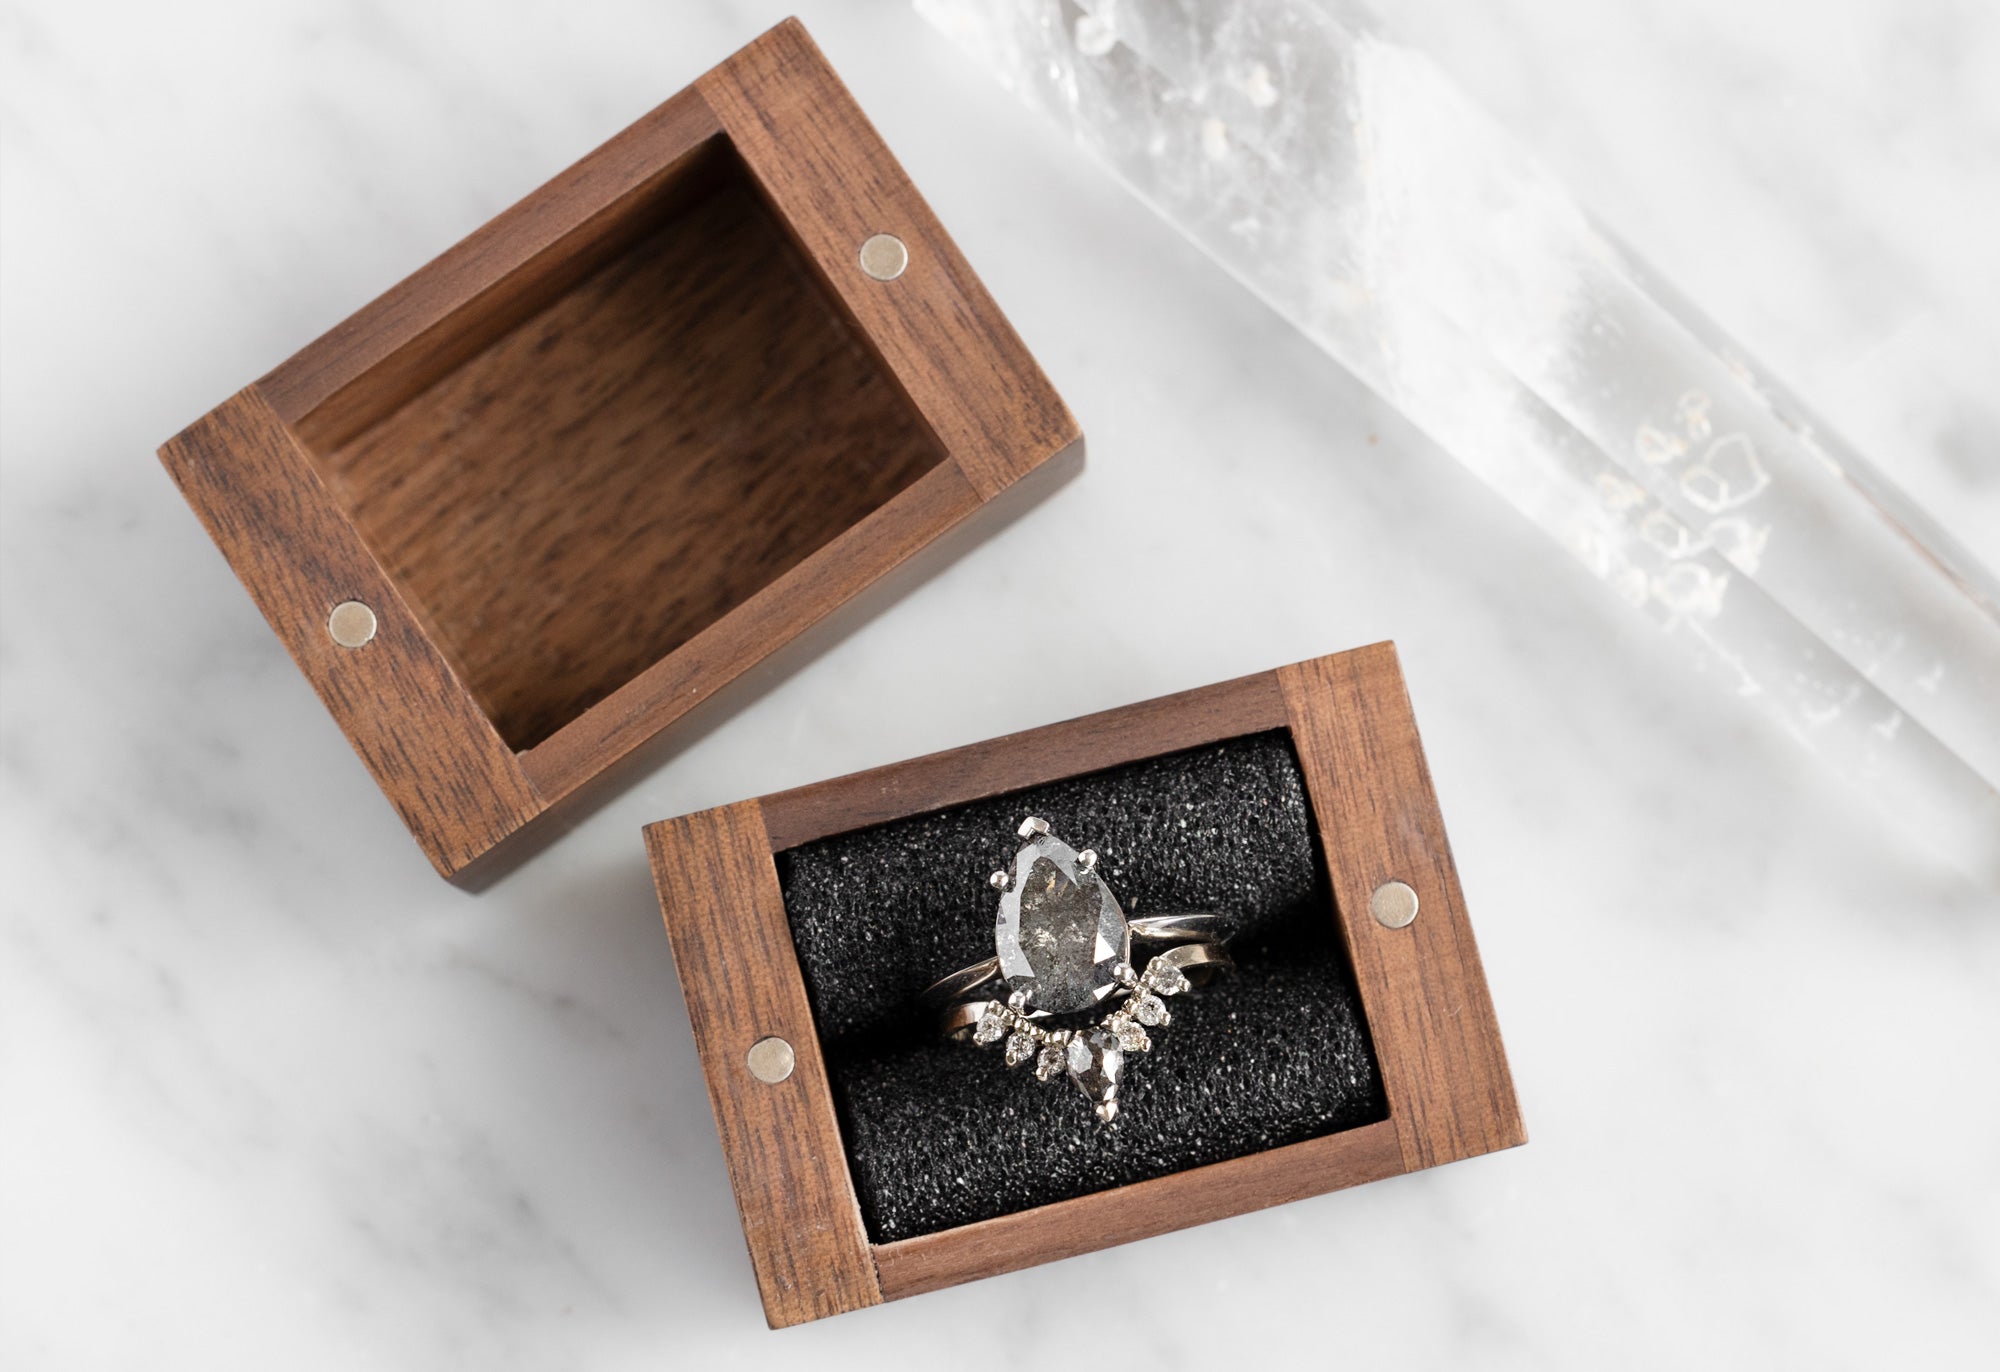 Does The Engagement Ring Box Matter? - Wedding Bands & Co.